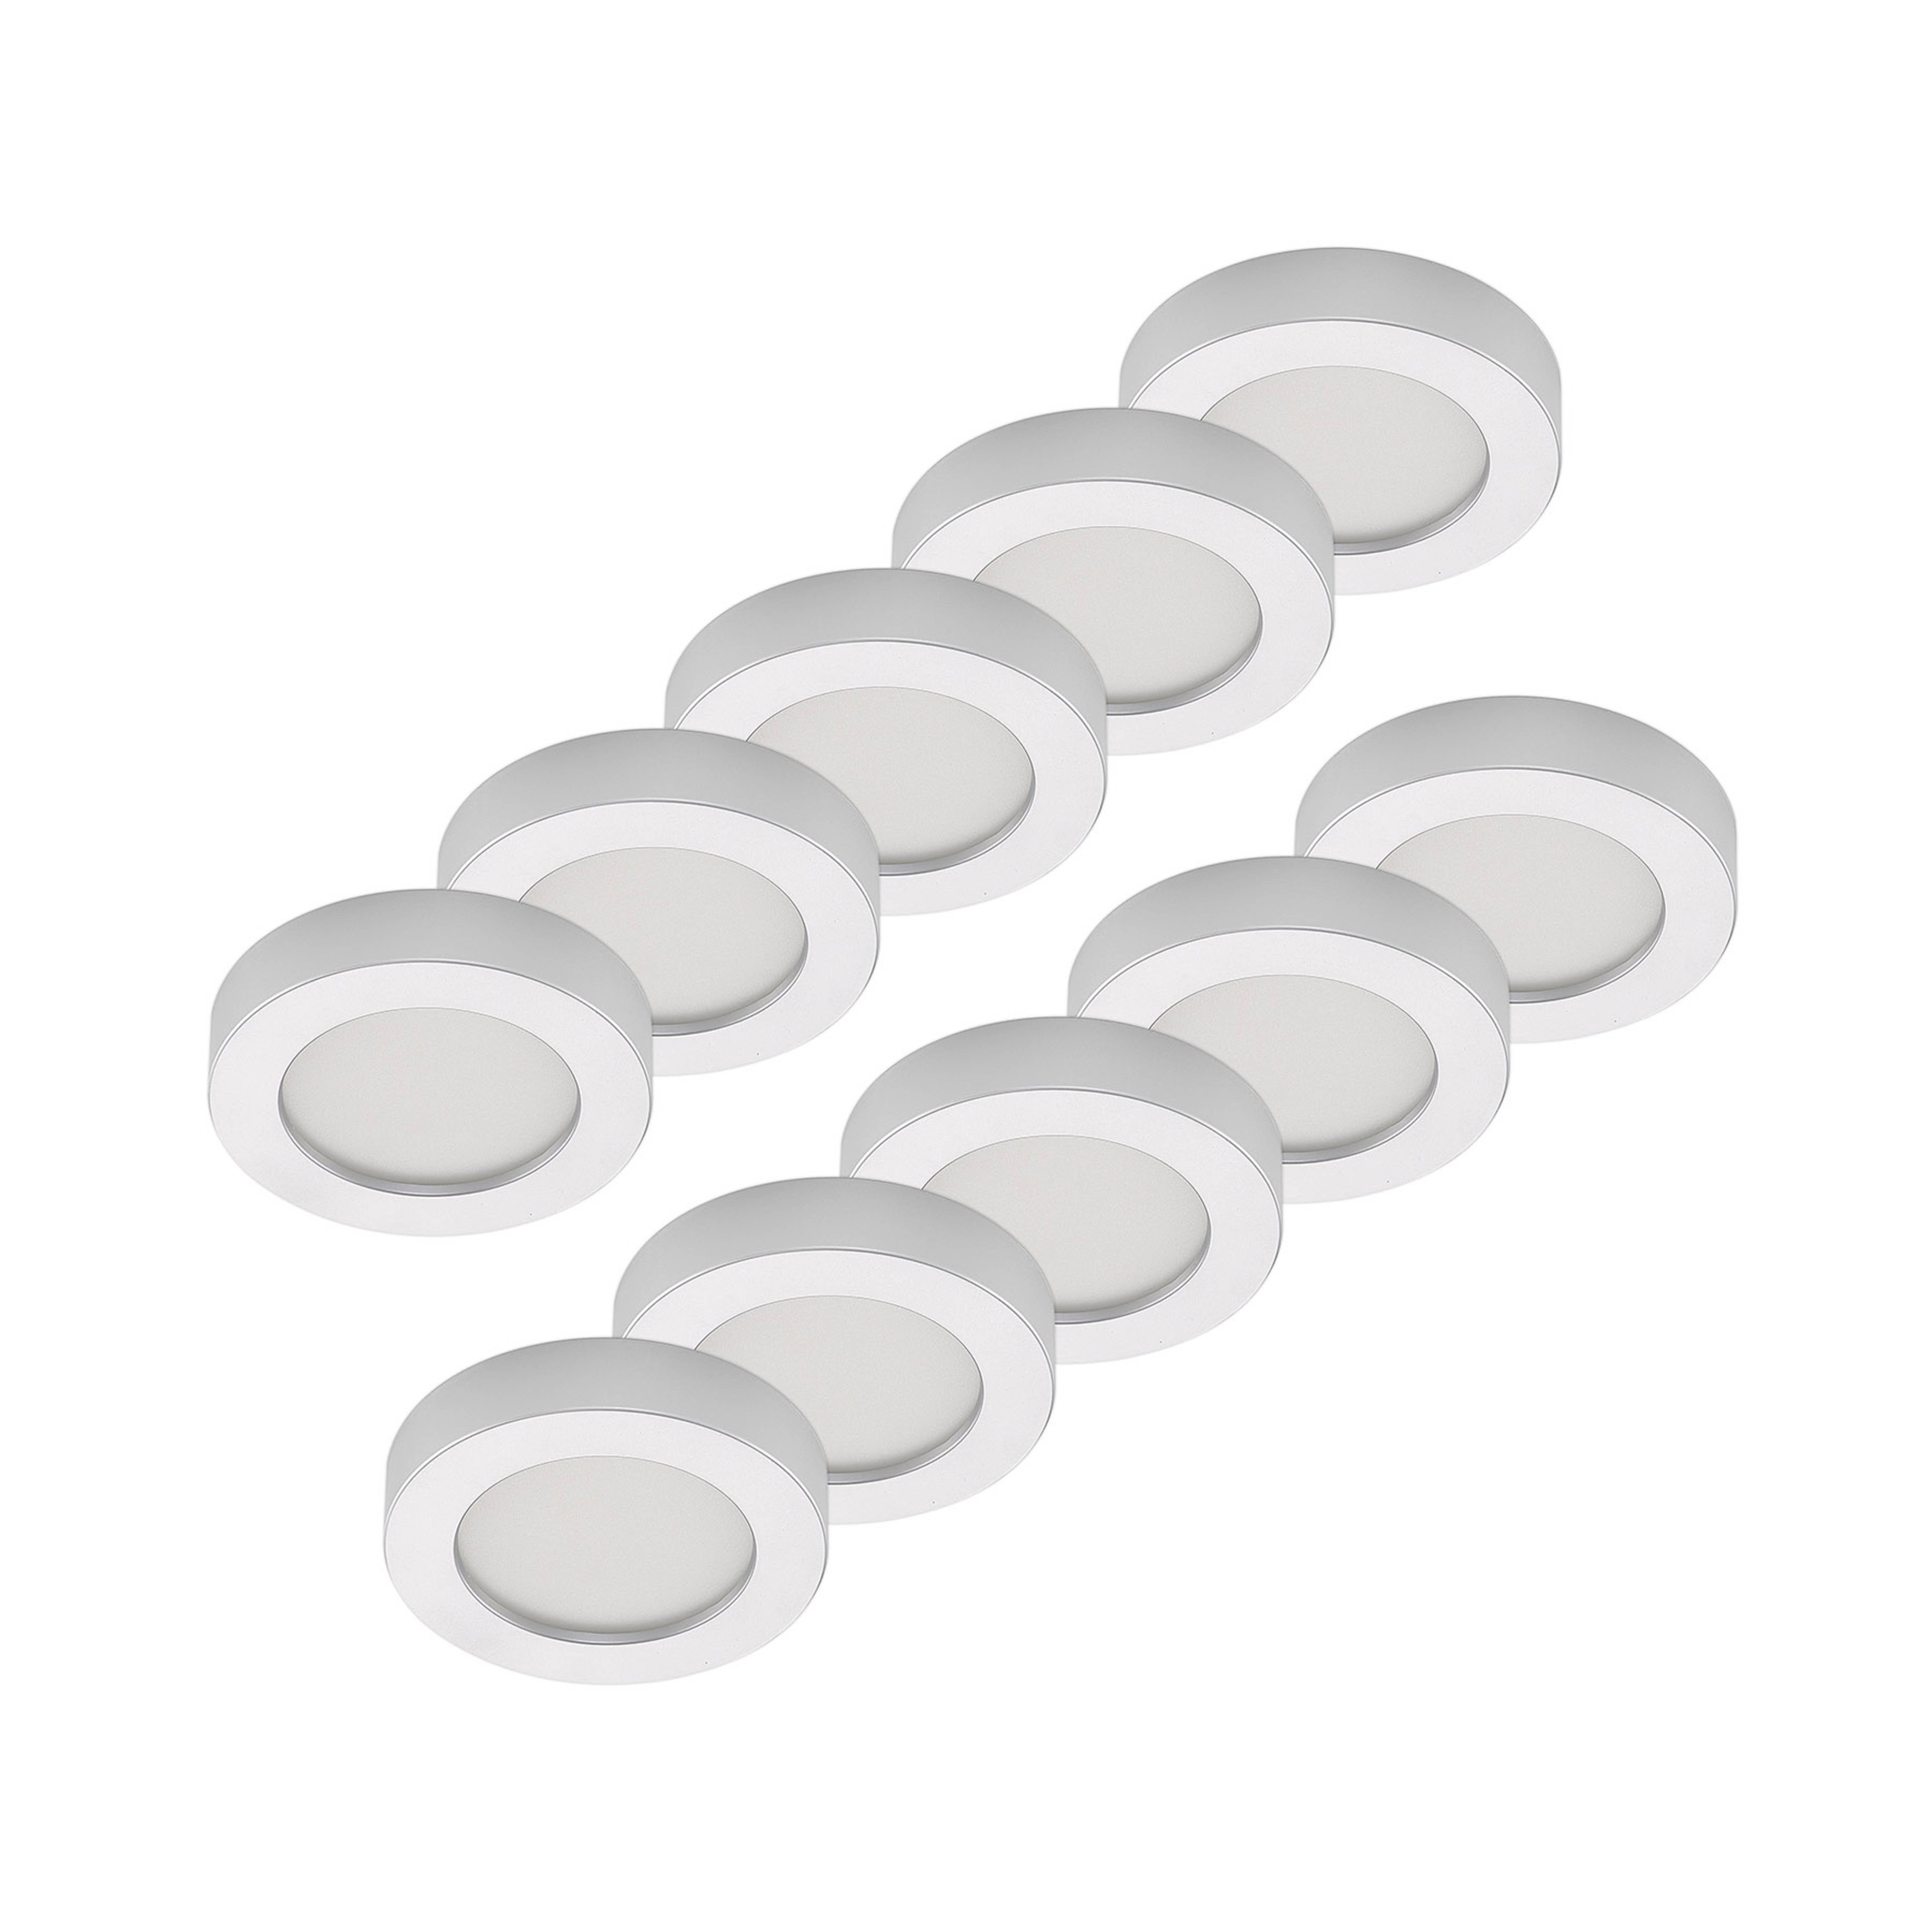 Prios LED ceiling lamp Edwina, silver, 17.7cm, 10pcs, dimmable